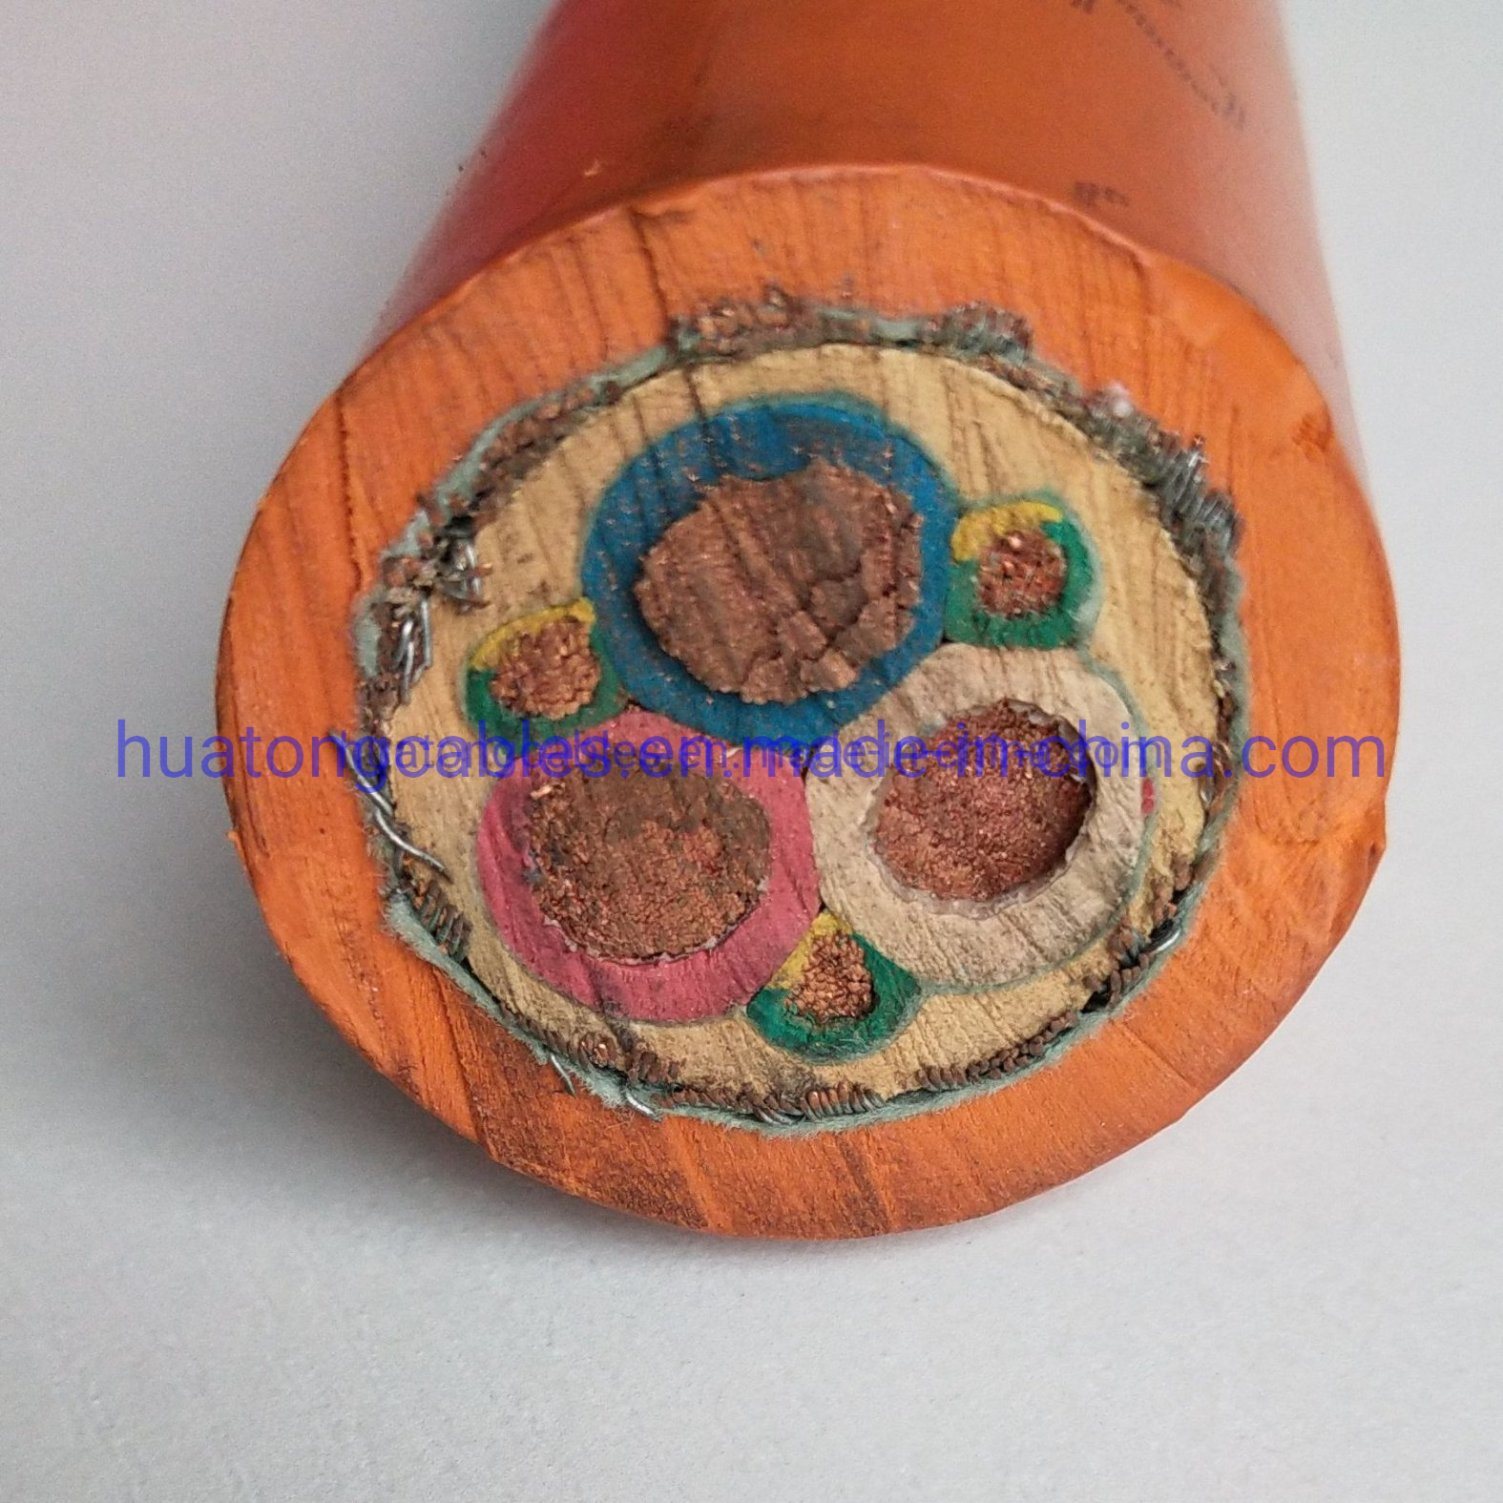 Type Shd-Gc Mining Cable 3 Conductor 4/0 AWG 5kv EPDM Insulation CPE Sheath Orange Color Mine Cable for Reeling/Trailing Cable